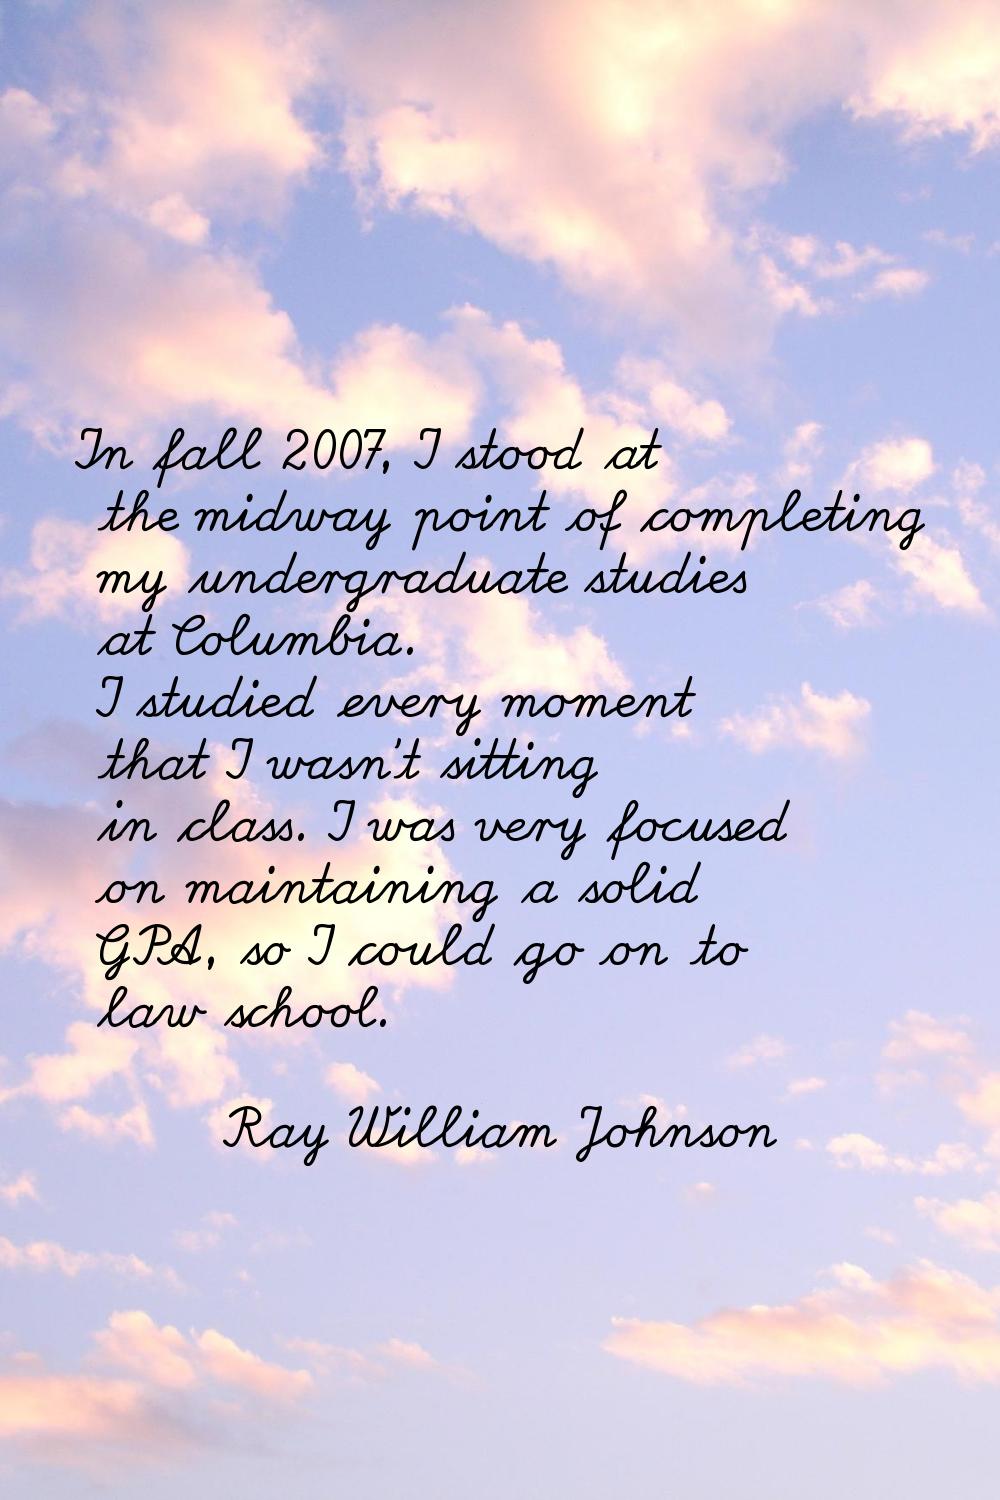 In fall 2007, I stood at the midway point of completing my undergraduate studies at Columbia. I stu